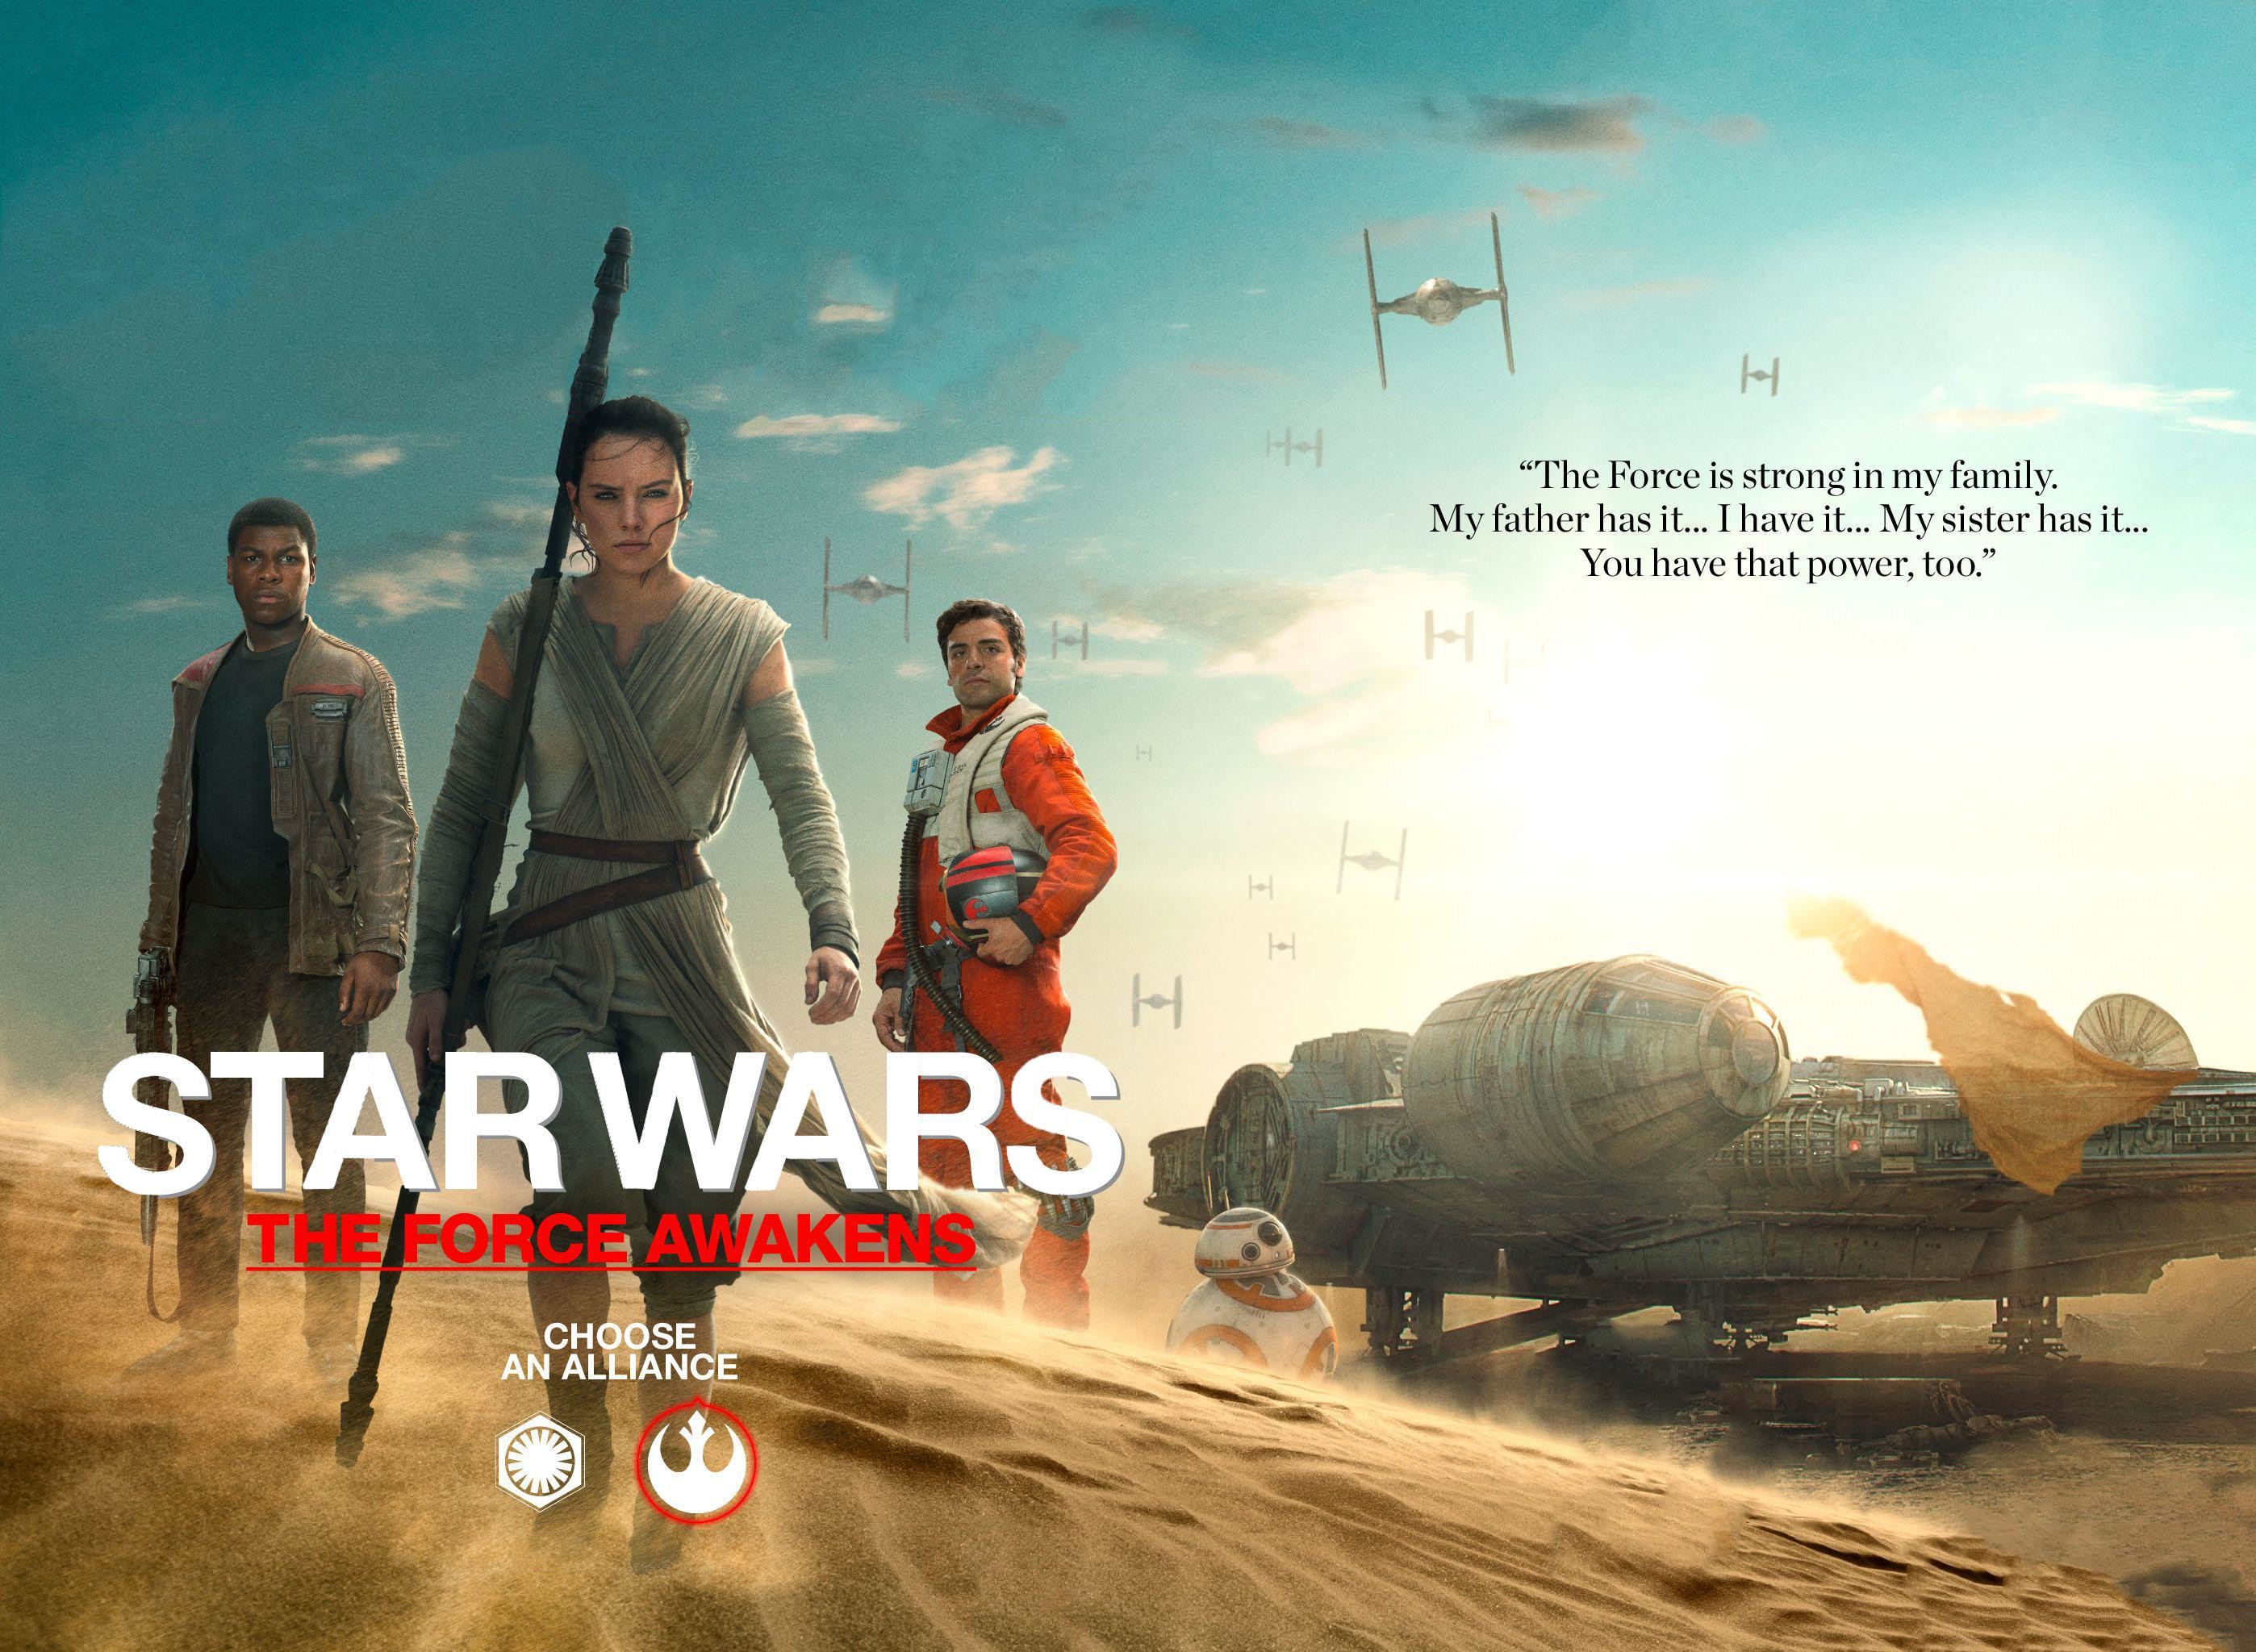 Star Wars The Force Awakens Empire Magazine Covers Wallpaper / Poster Edits